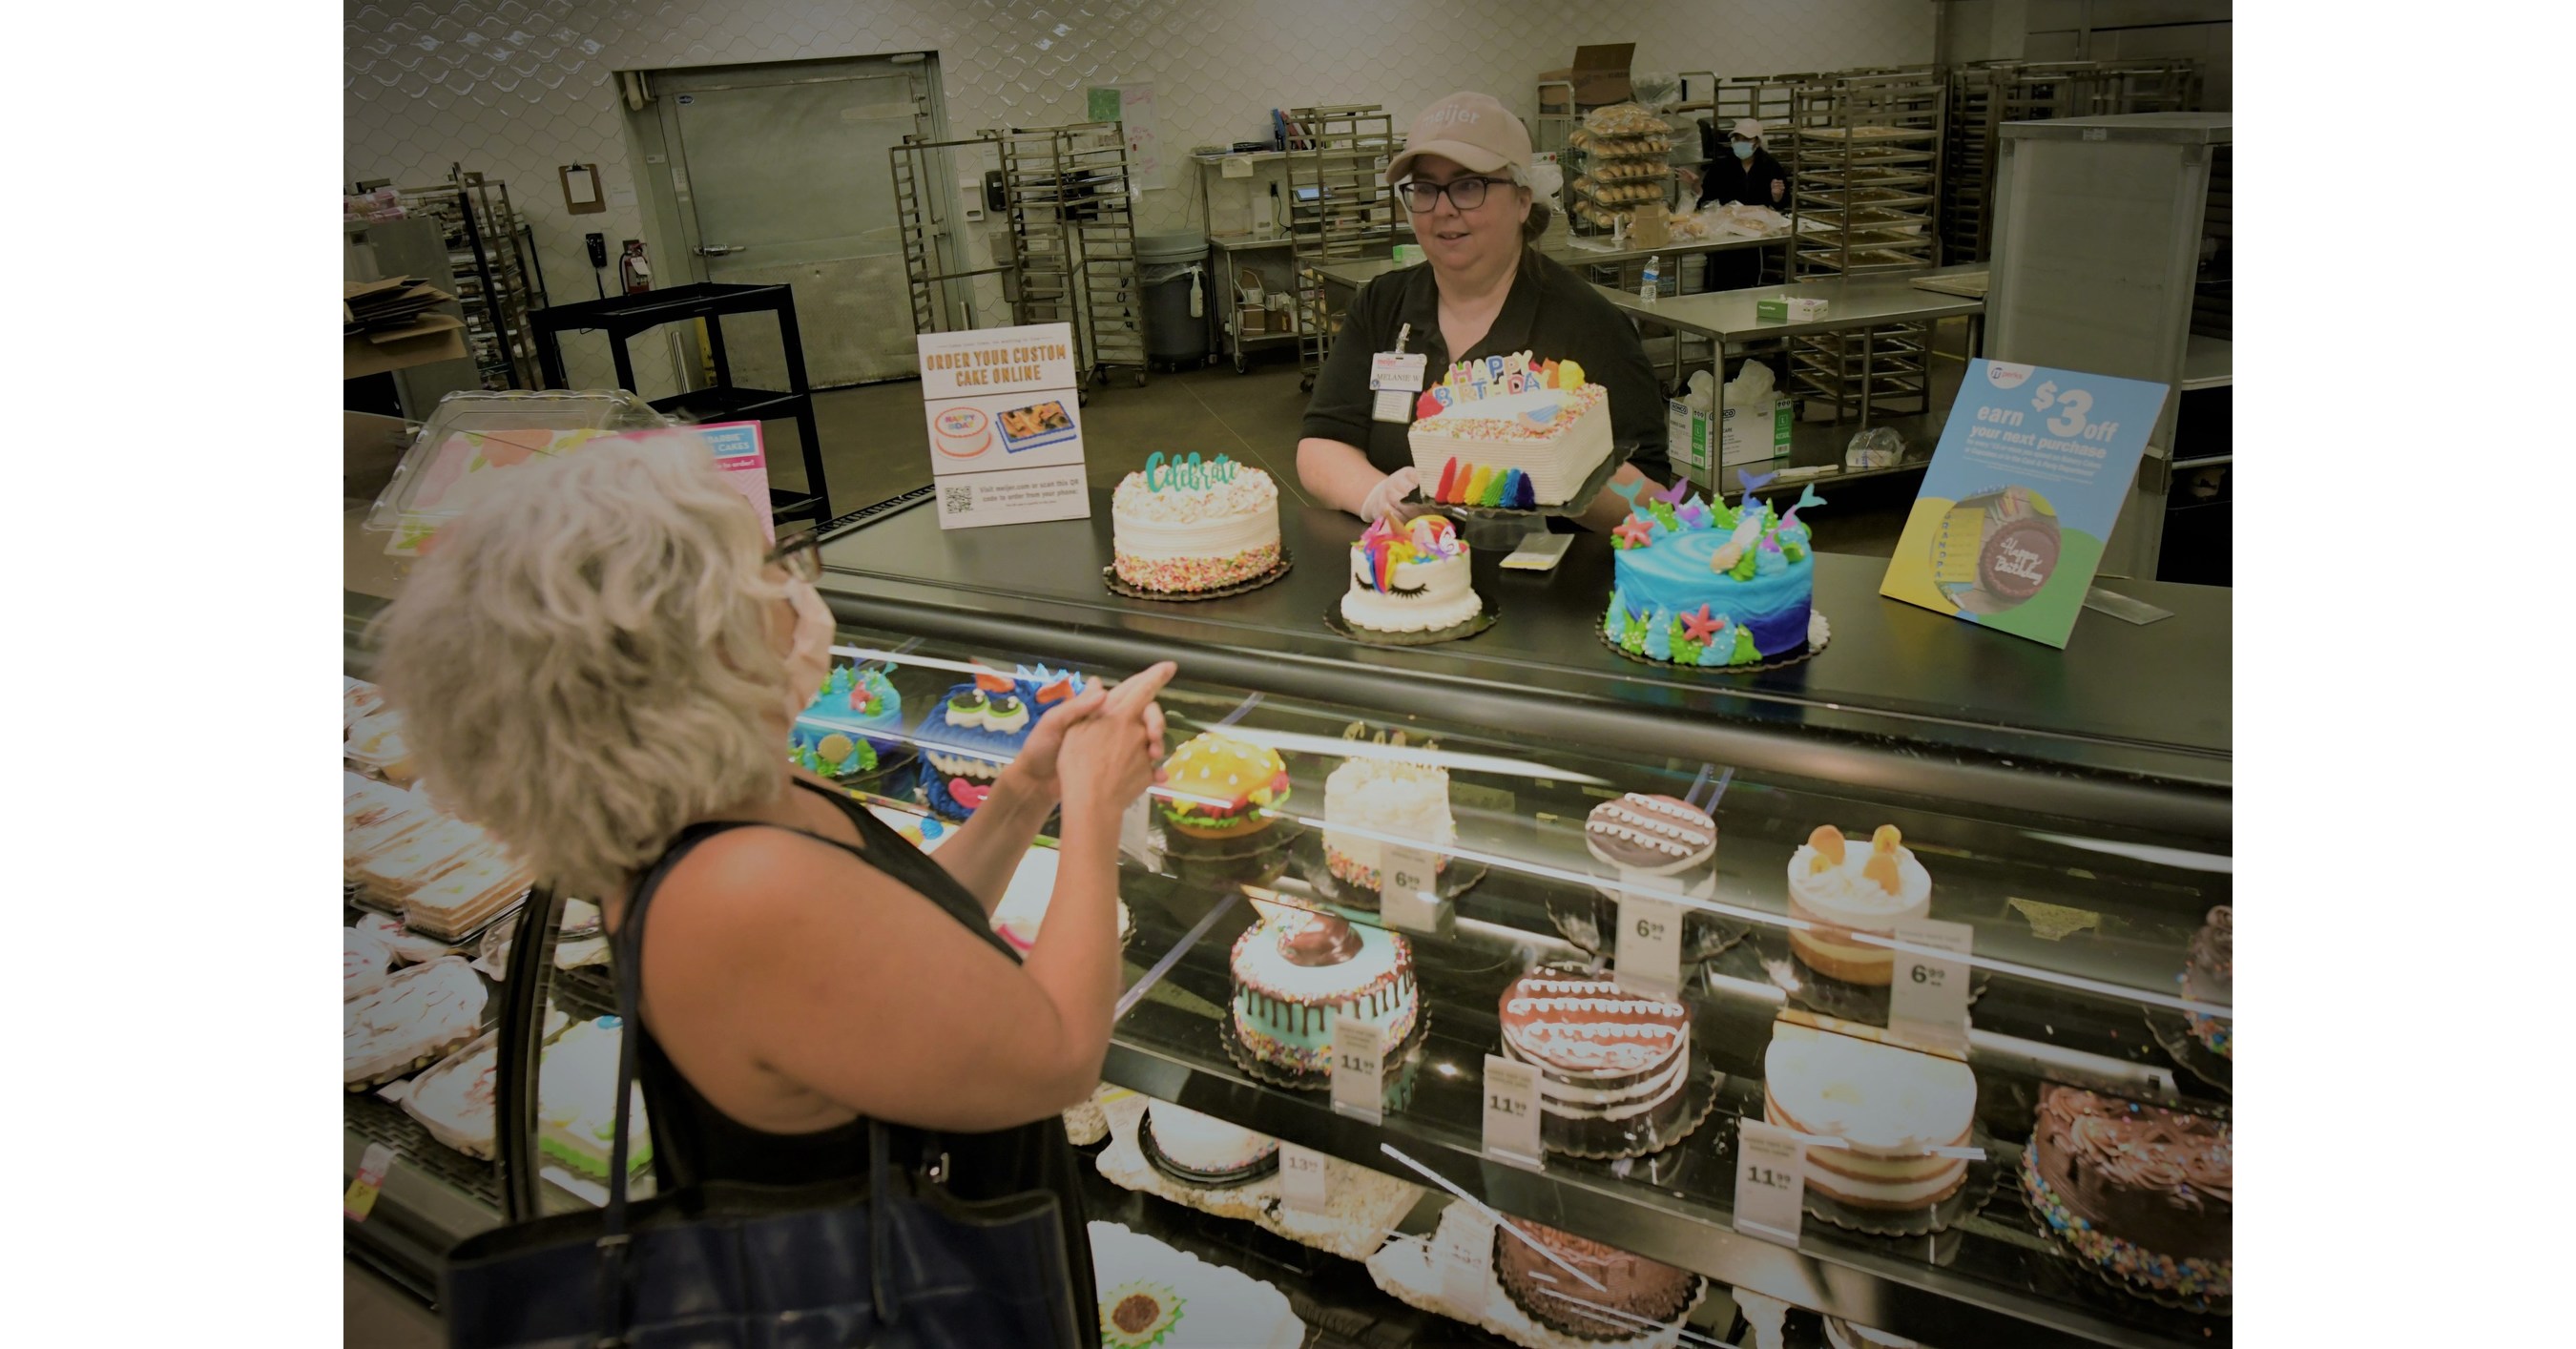 Meijer Launches Online Custom Cake Ordering Platform in Time for Most